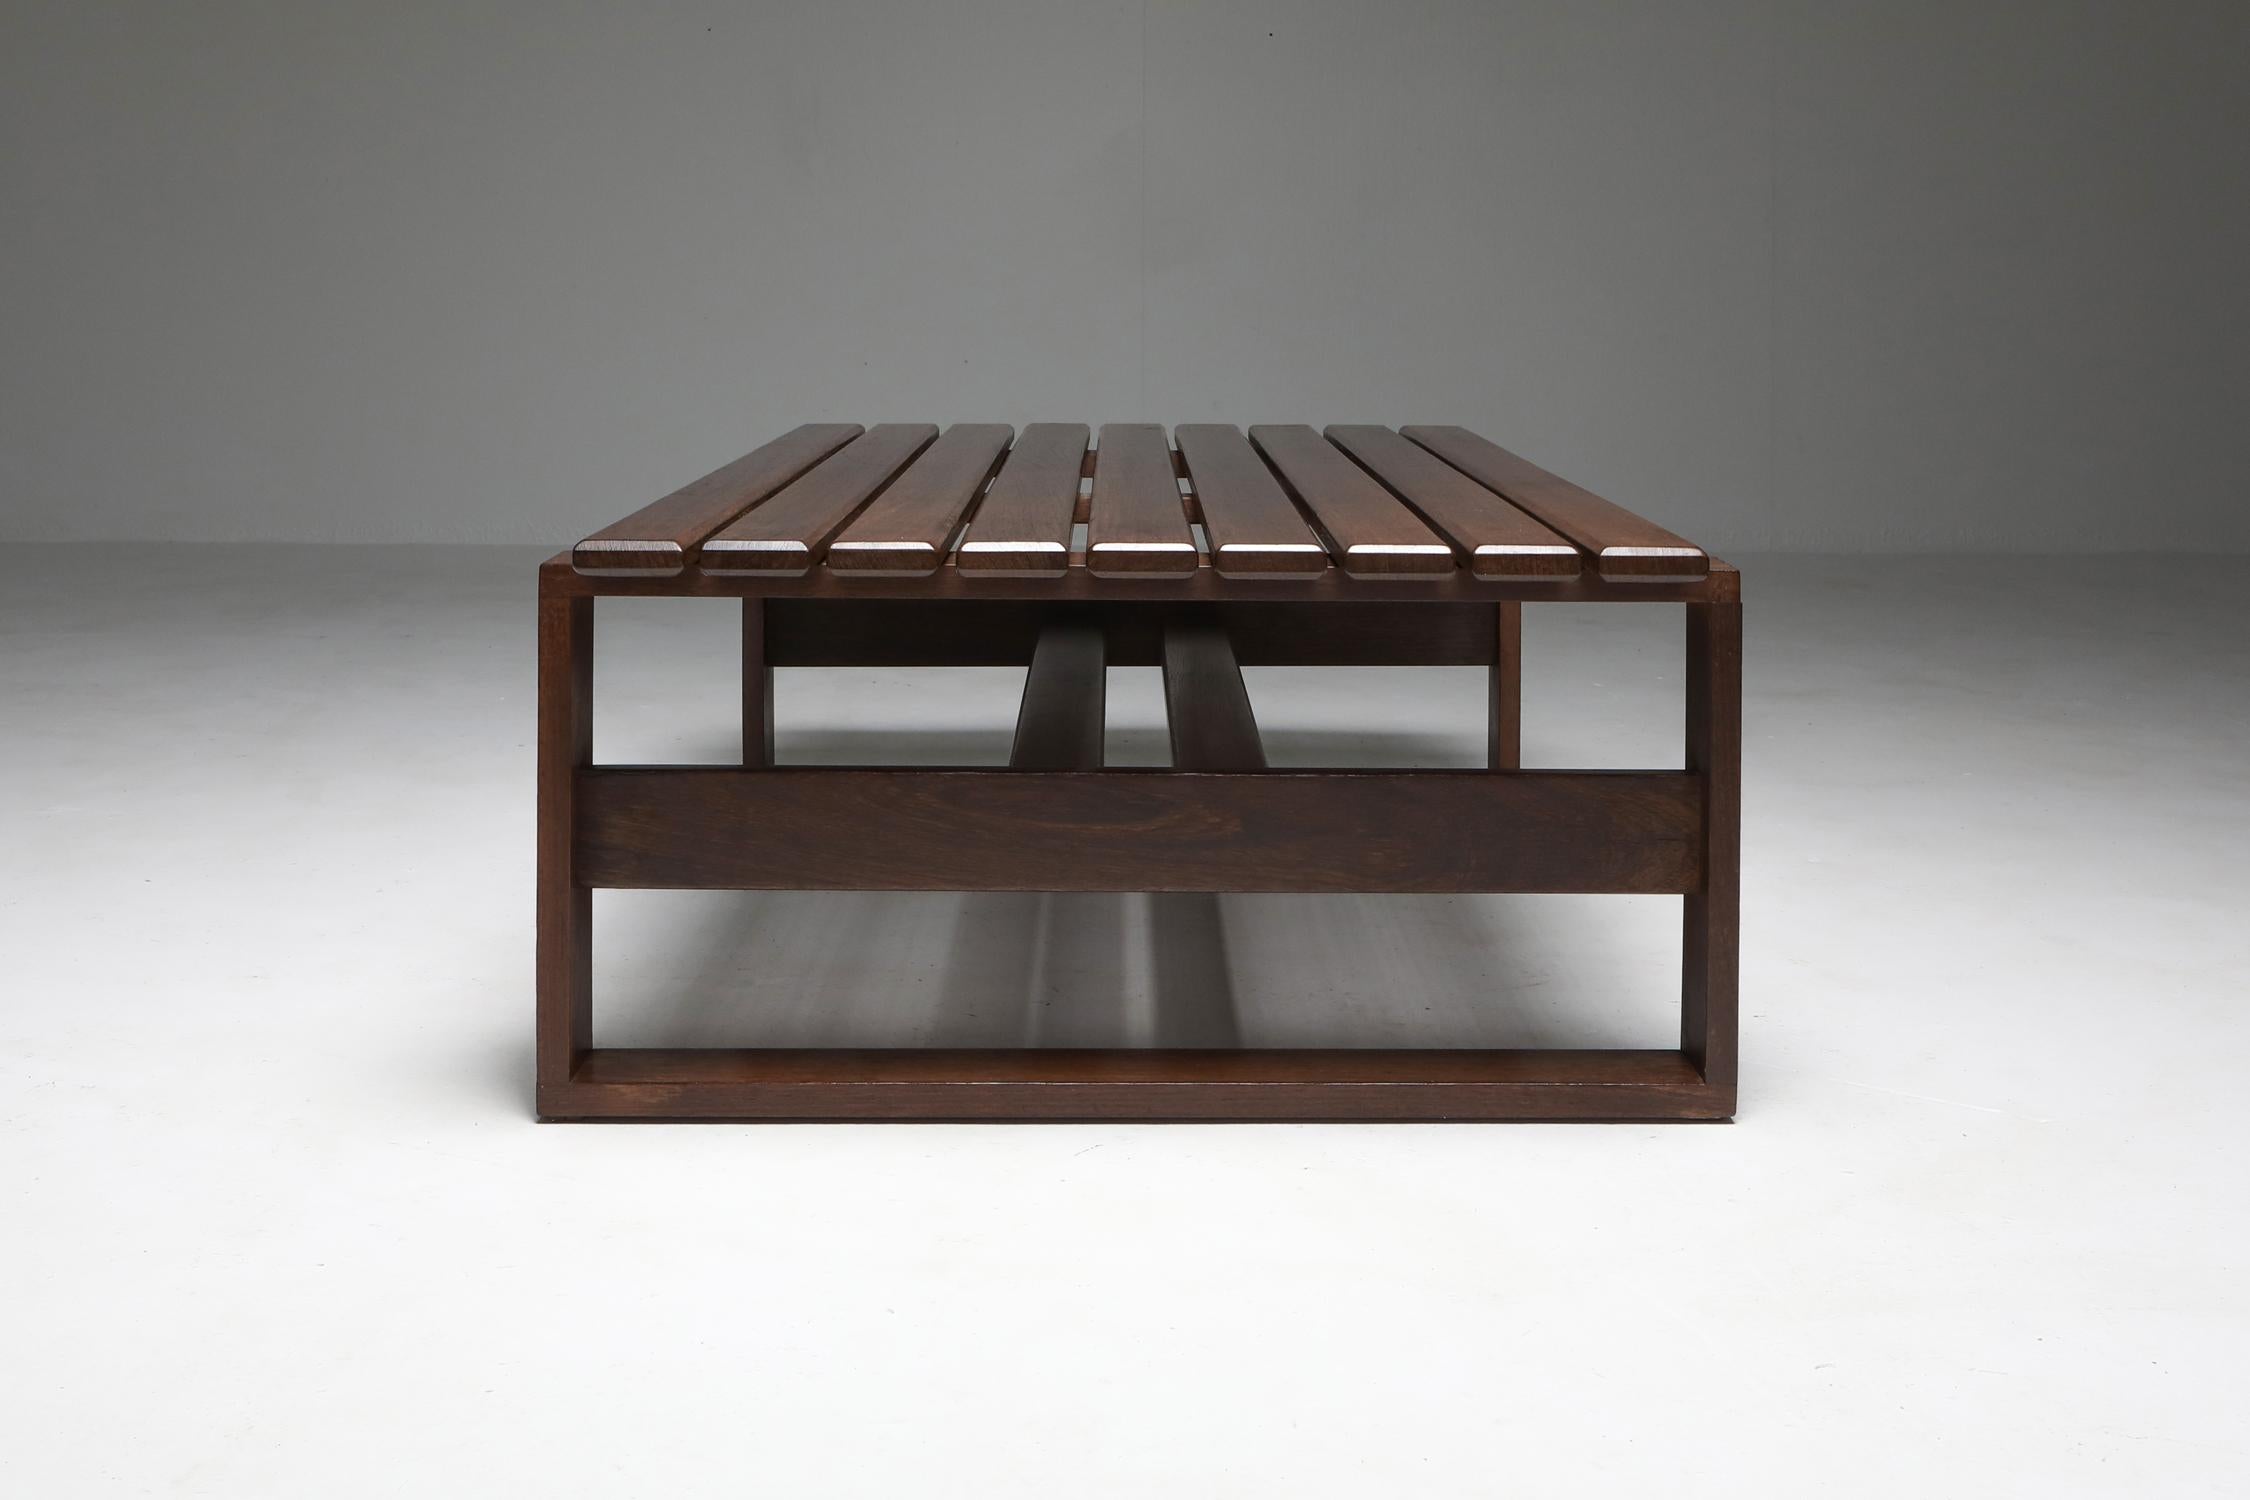 Wengé bench, Walter Anthonis, Dutch, 1960s

Solid wengé piece which could act as both coffee table and bench.
Beautiful joints.
Would fit as well in a Minimalist modern decor as in a more wabi sabi Axel Vervoordt inspired interior.

